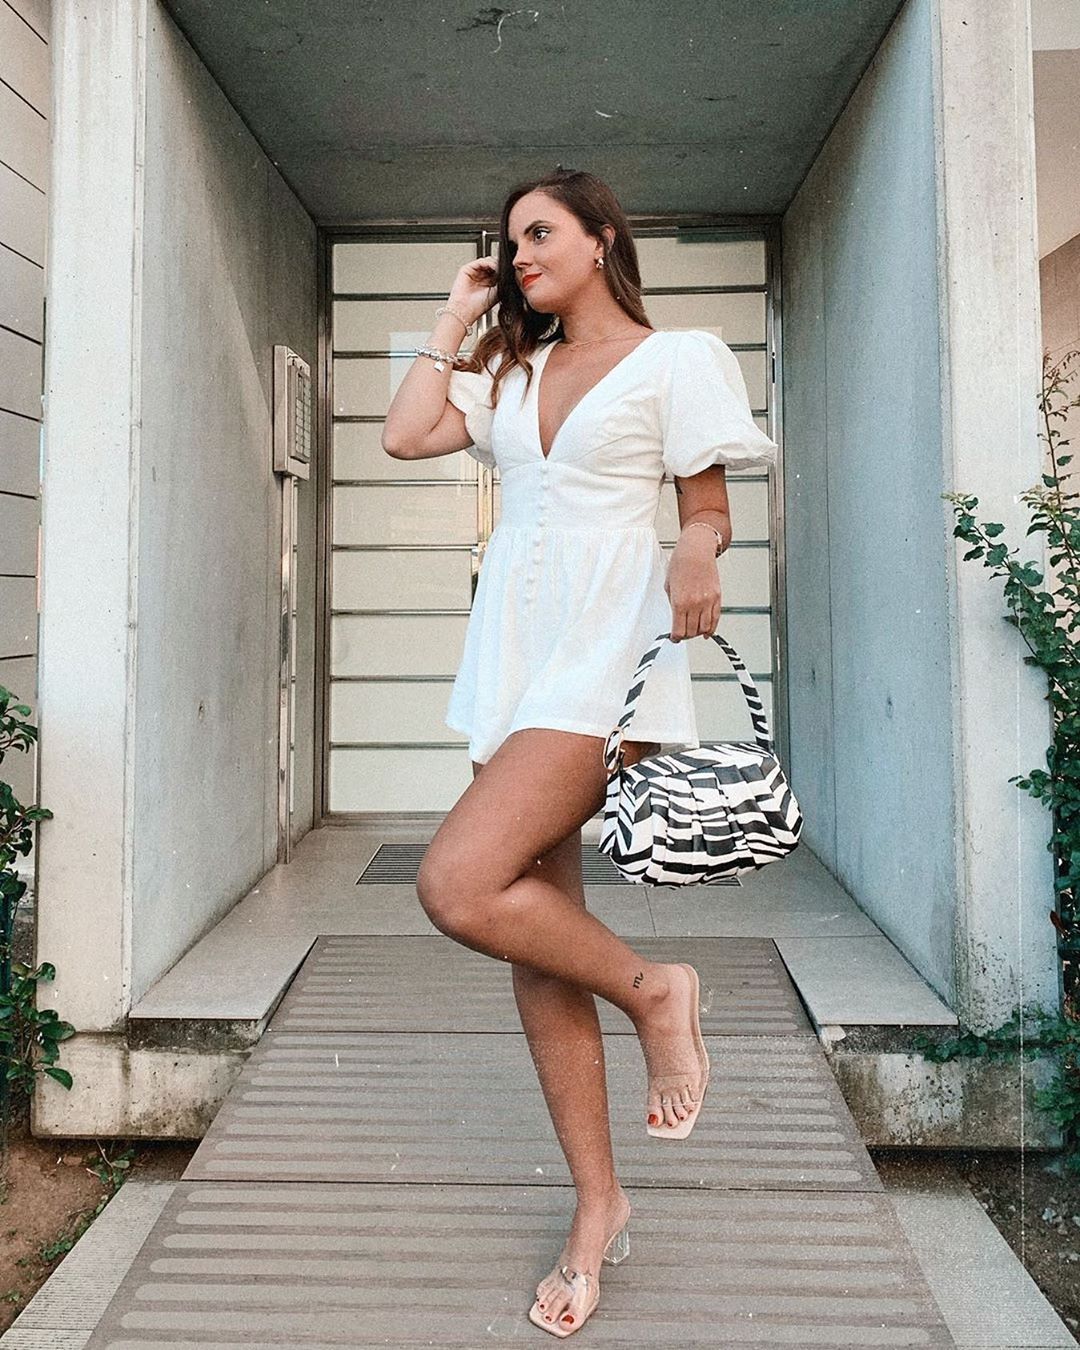 SHEIN.COM - Dress up for any occasion ✨  @carmenap2510

Shop Item #: 1237419

#SHEINgals #SHEINstyle #StyleGoals